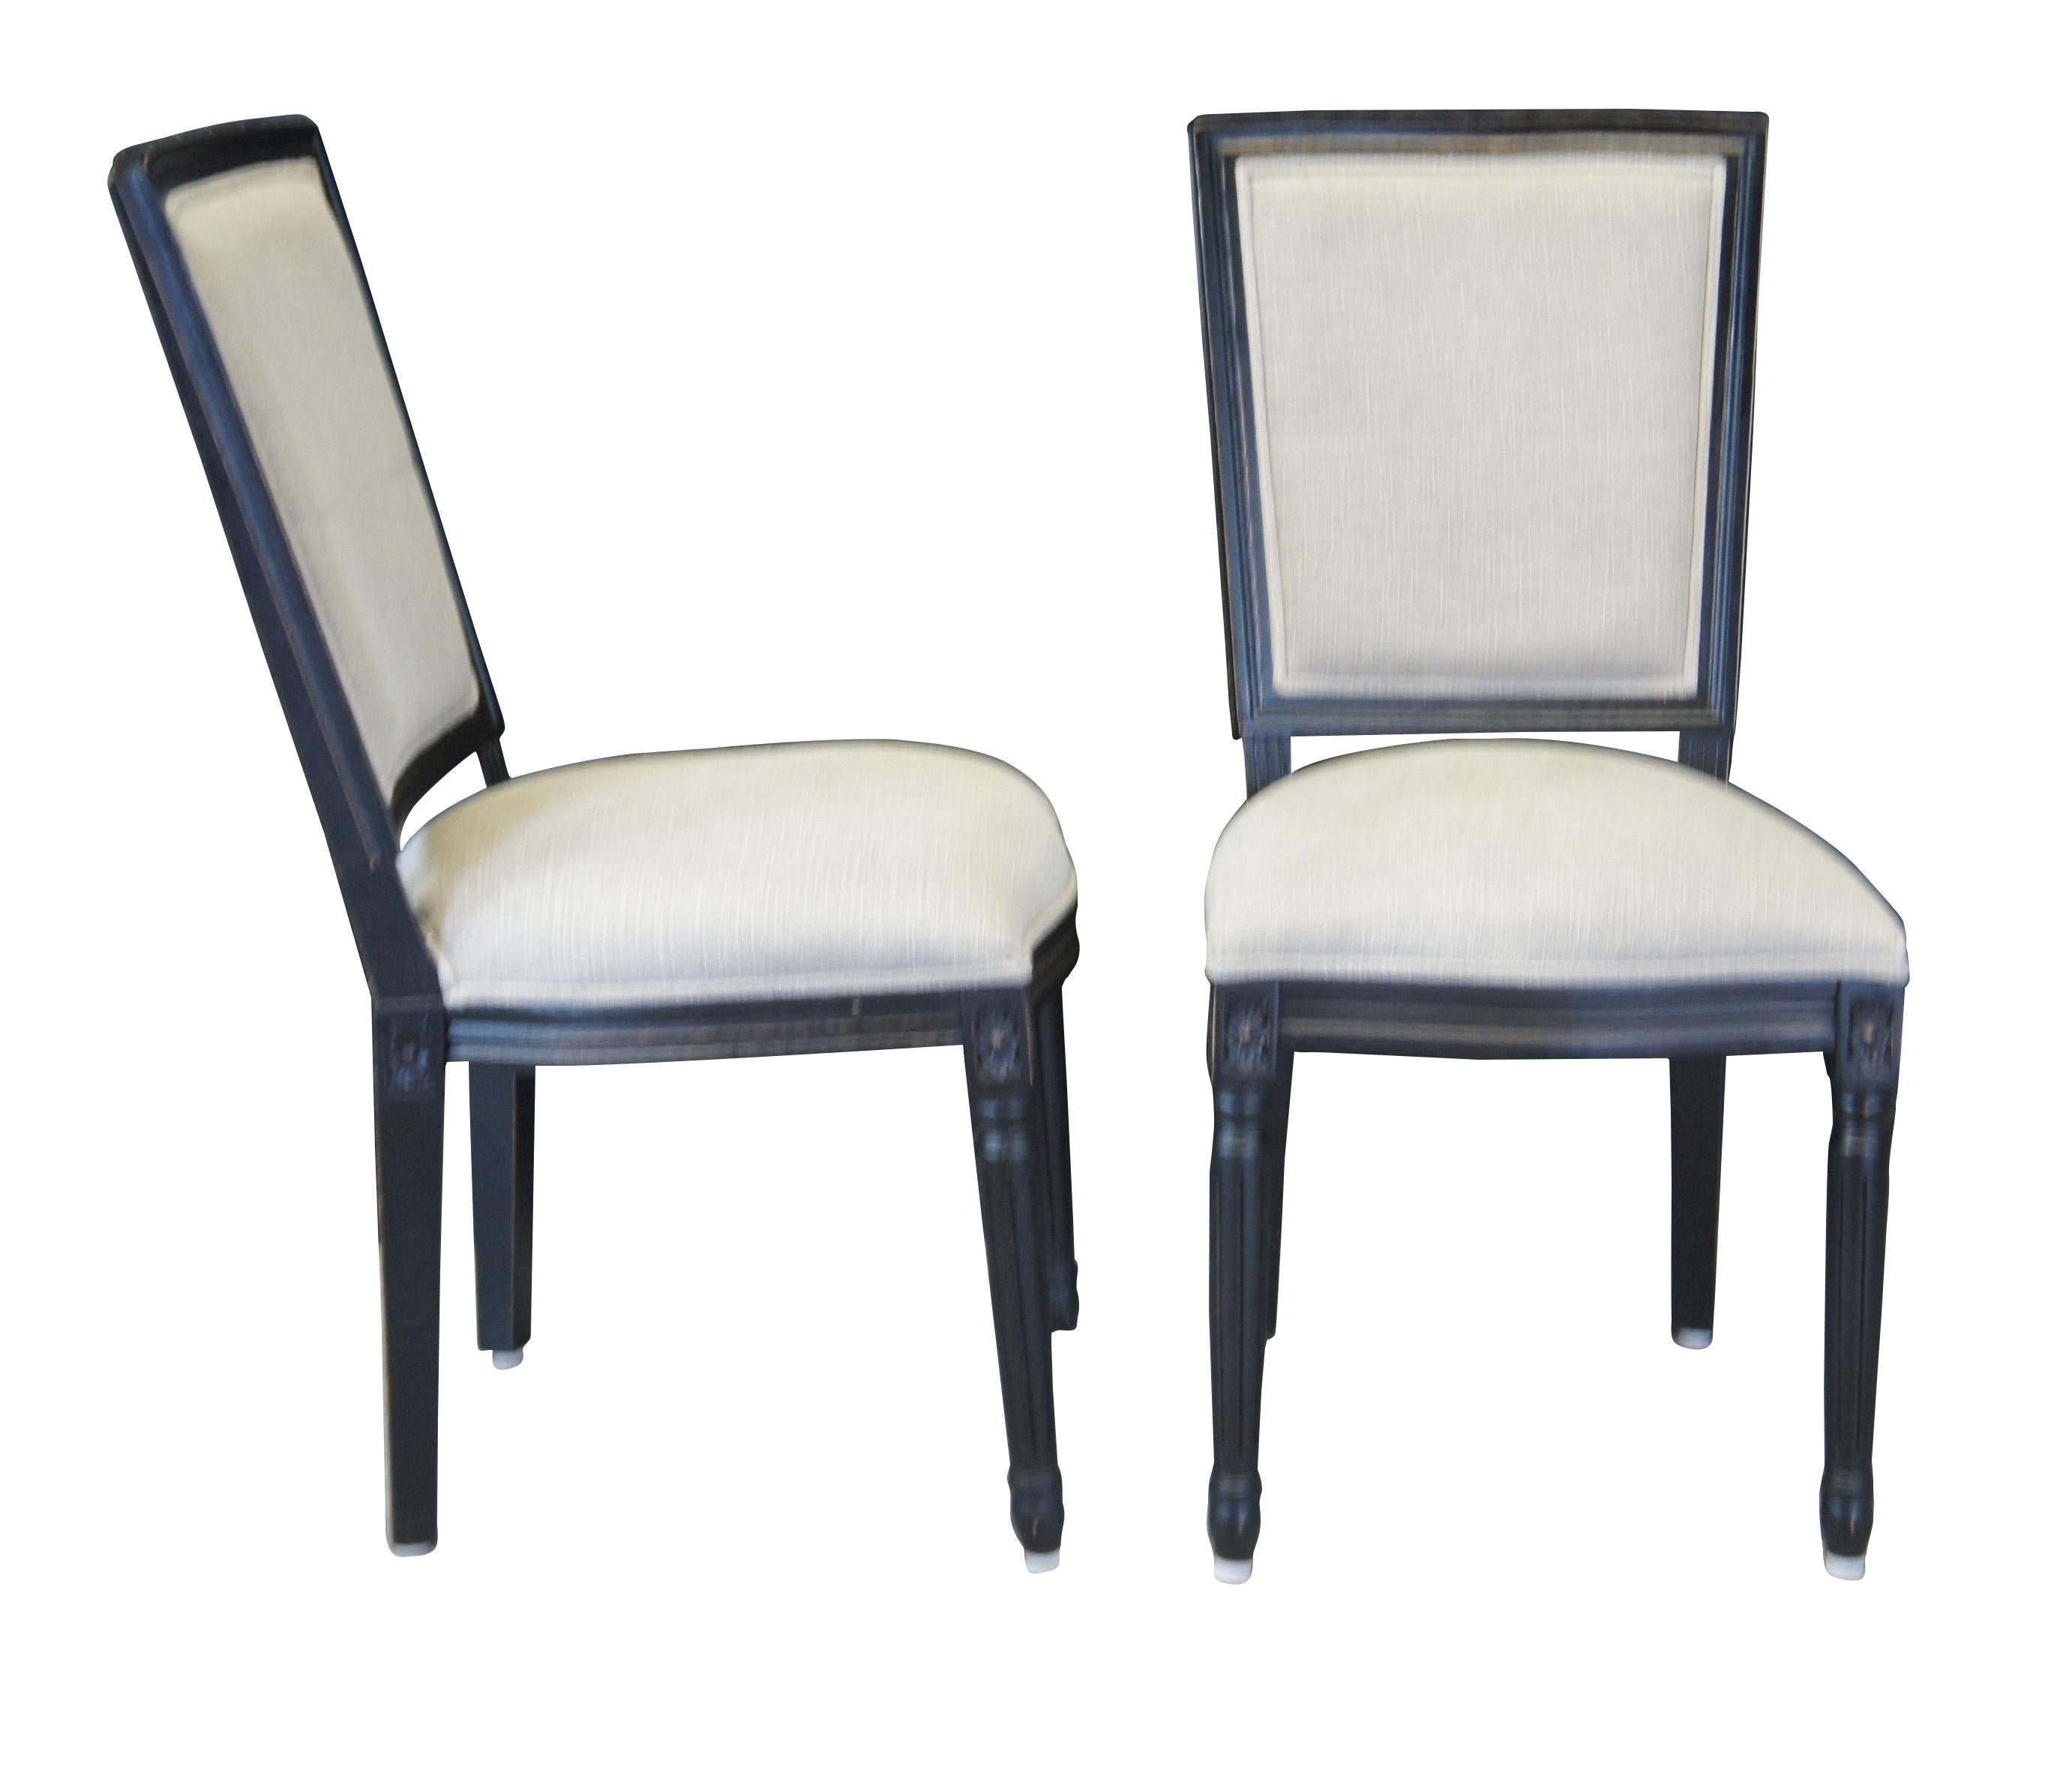 4 Ahaus Adele Upholstered Oak Dining Chairs, finished in black with gray fabric. The black finish has been discontinued and is a rare find.

Inspired by the dark yet dignified grandeur of 18th century neoclassical masters, the Adele Dining Chair